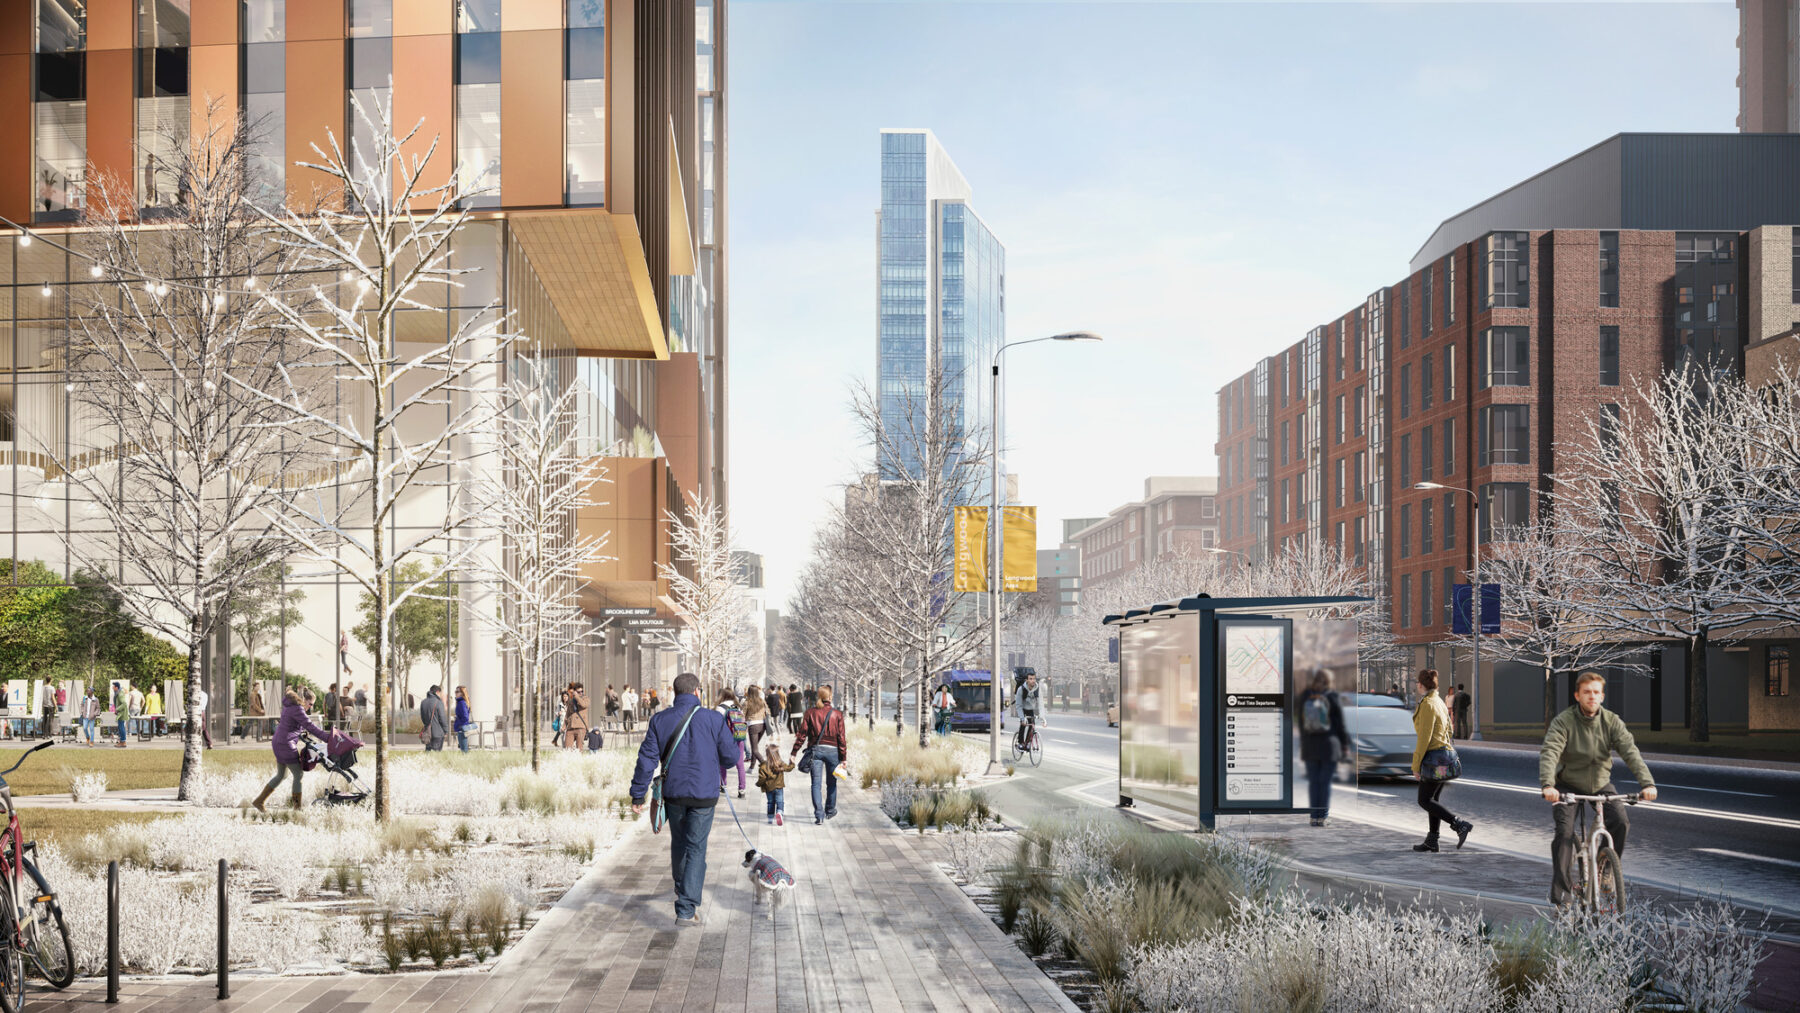 A perspective rendering from the sidewalk along the plan's park space shows a view down Brookline Ave in the winter, with the proposed buildings rising to the left, and a new bus stop shelter and bike lane along the street to the right.